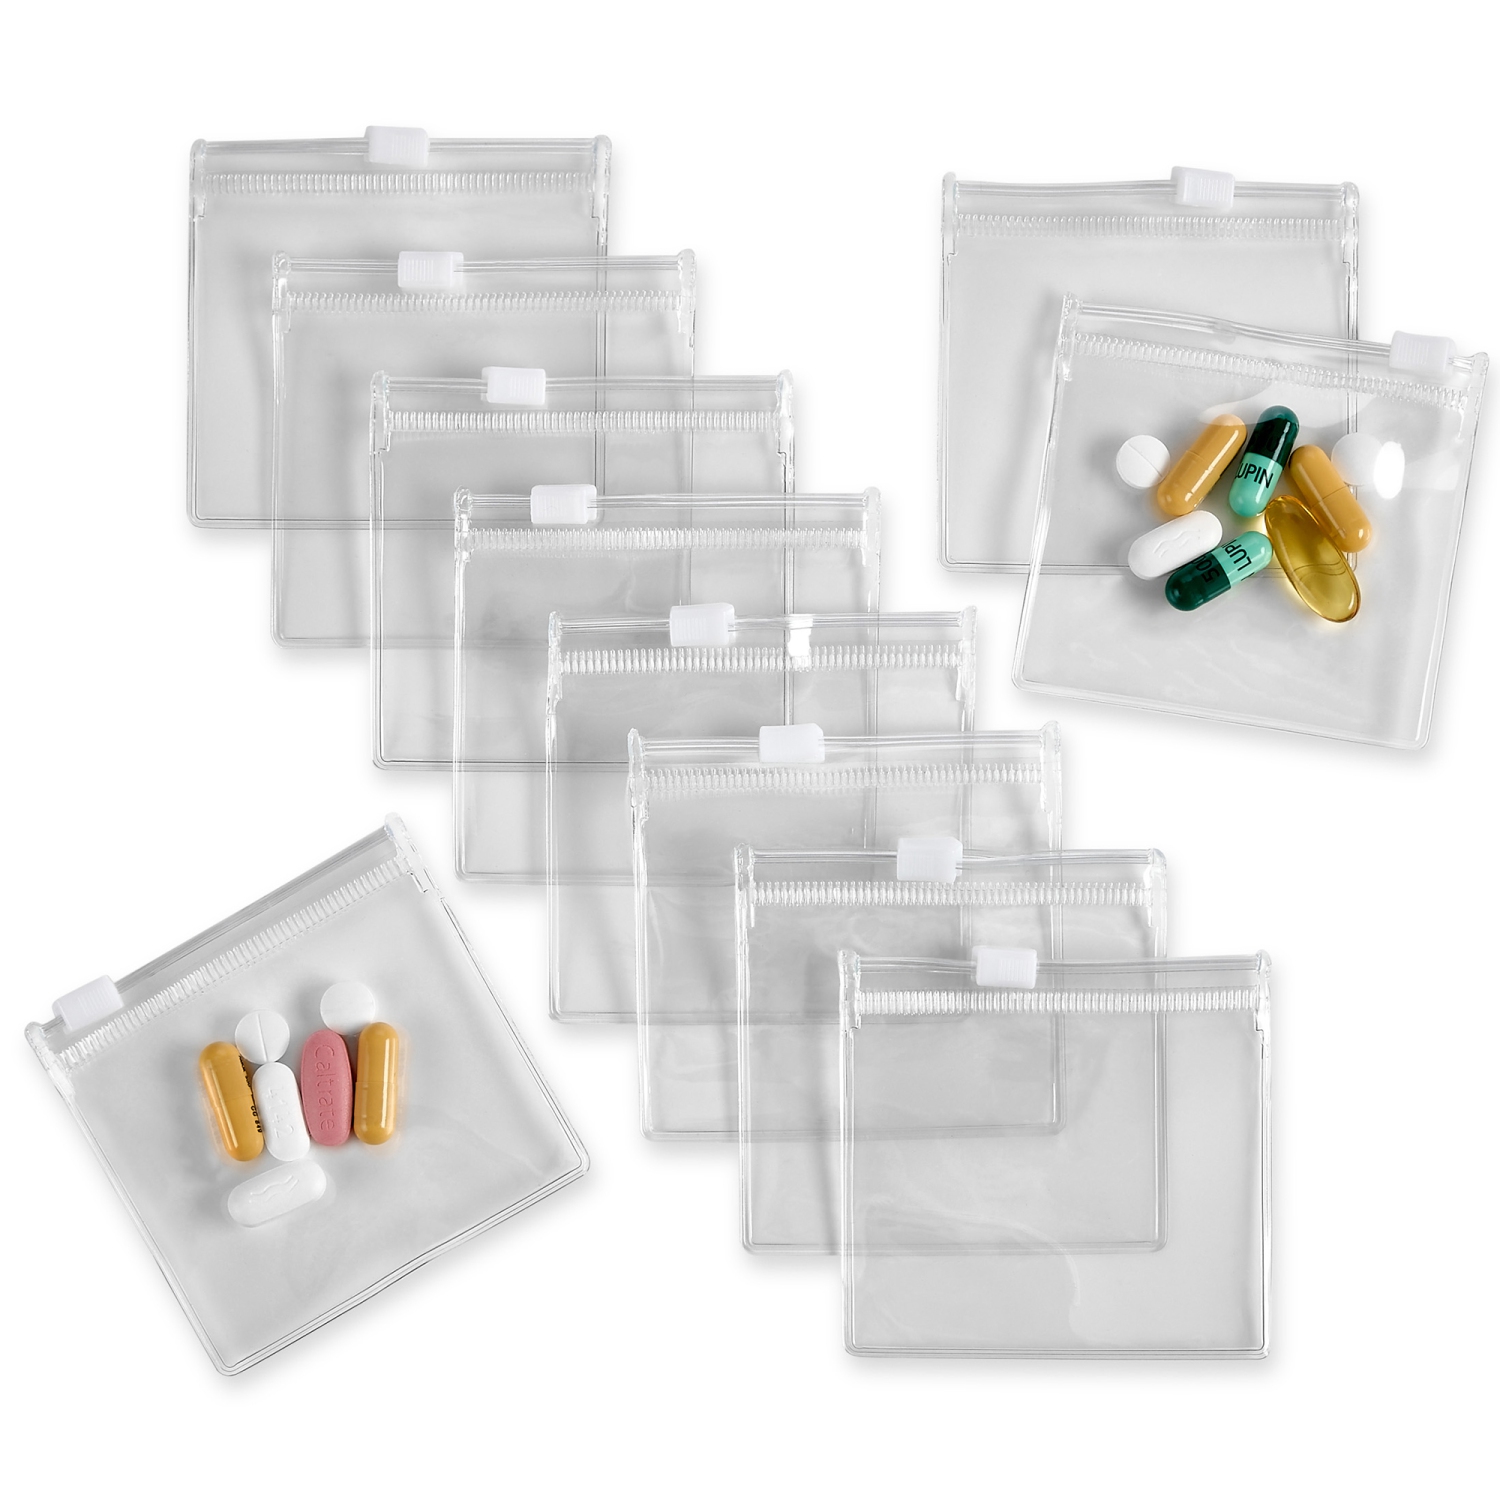 Zippered Pill Pouch Bags - 24 Pcs, Slide Lock Clear Plastic Mini Bags, BPA-Free for Pills Vitamins, Supplements, Medications, Jewelry, Crafts, Small Objects